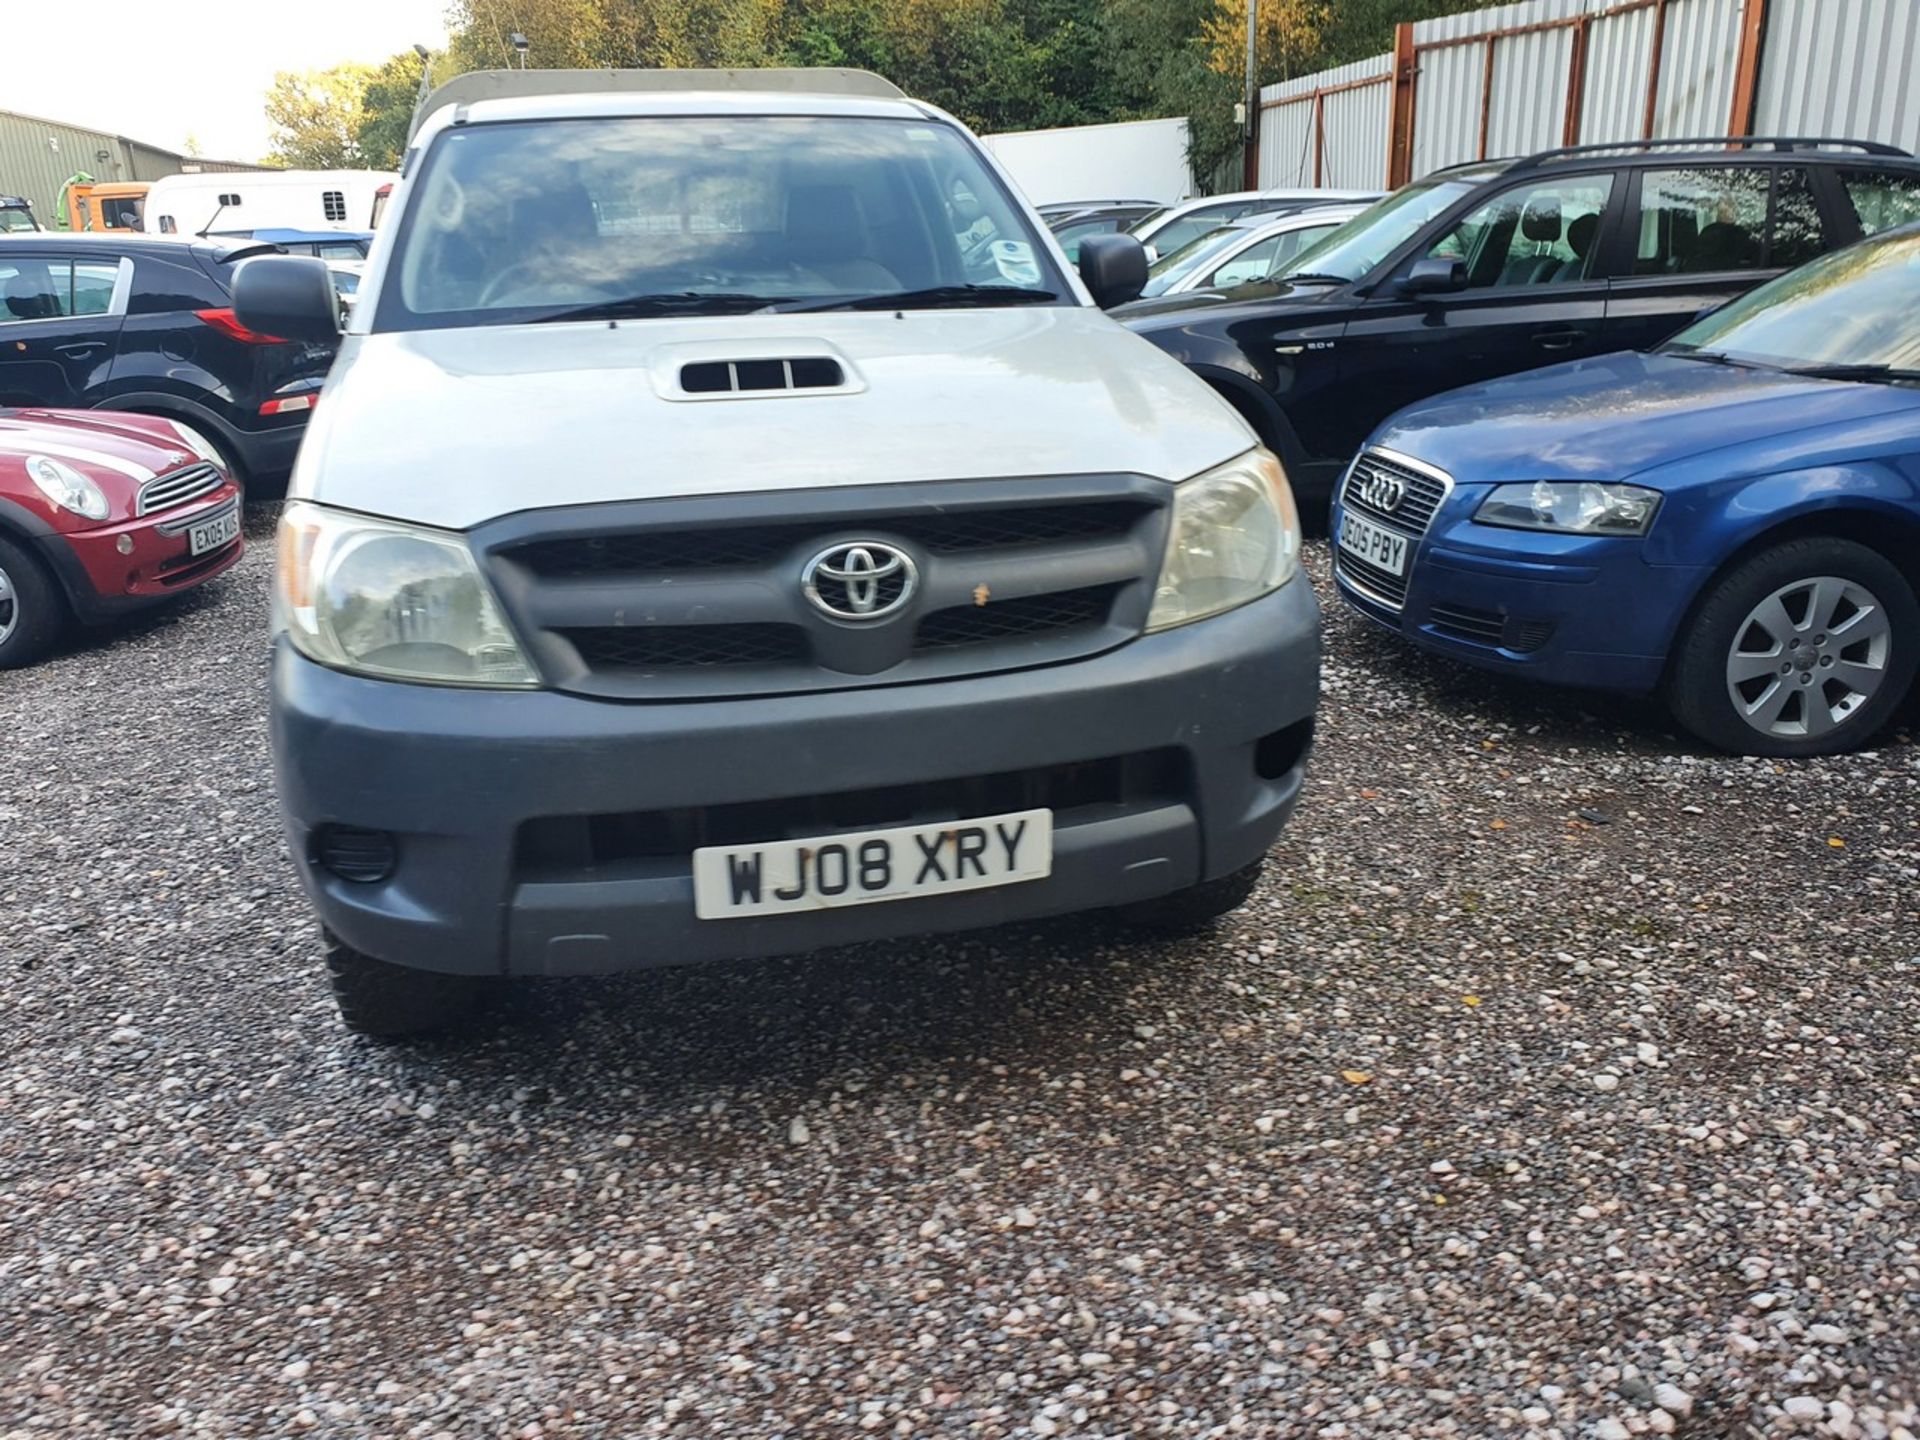 08/08 TOYOTA HILUX HL2 D-4D 4X4 S/C - 2494cc 2dr 4x4 (Silver, 78k) - Image 12 of 32